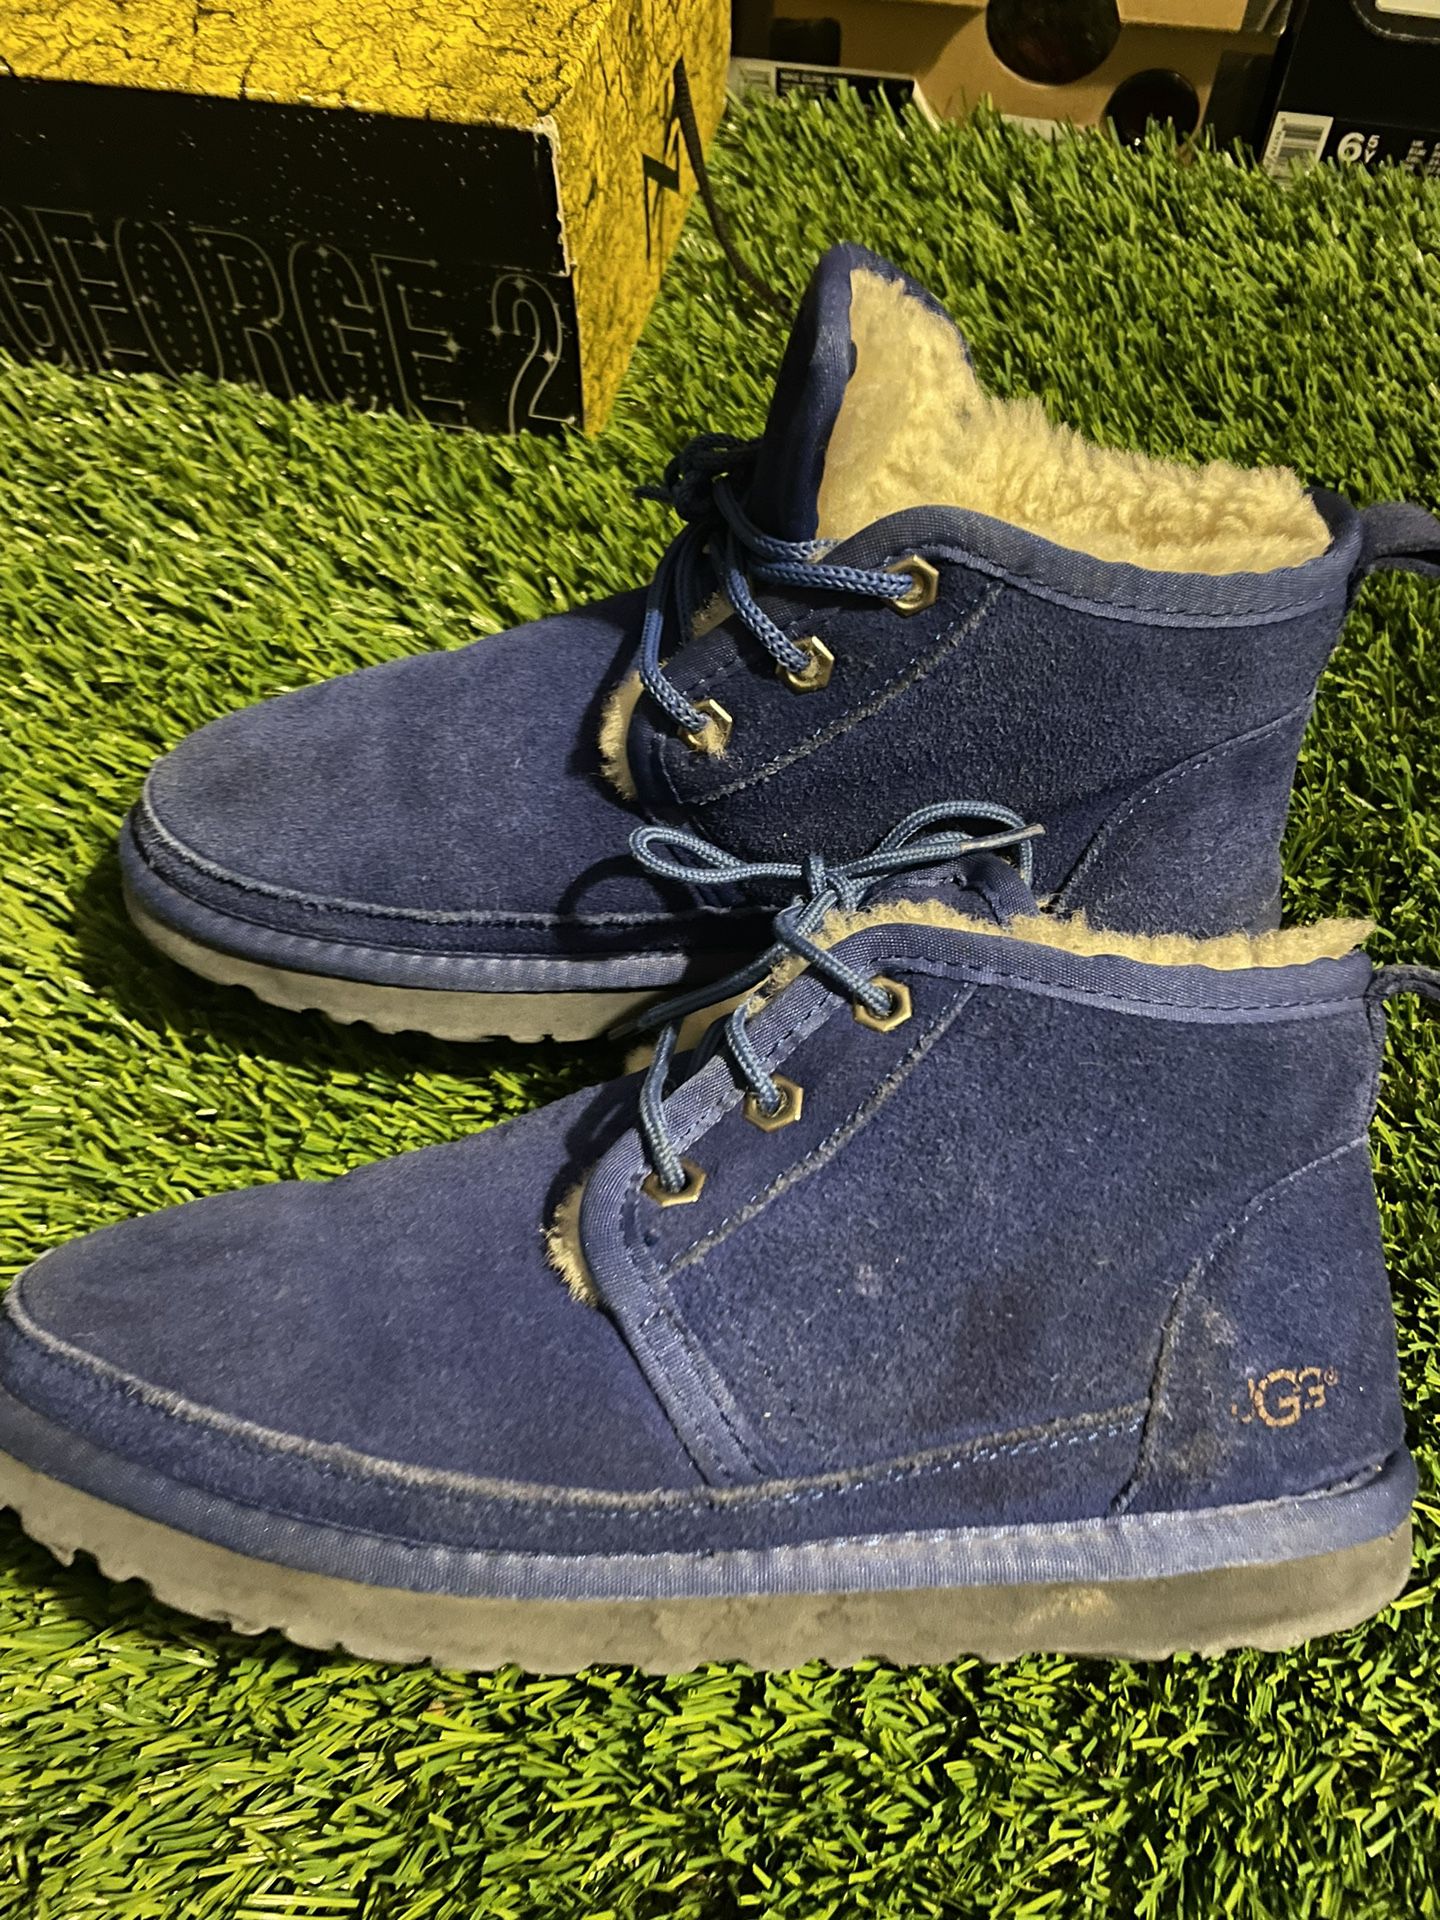 Uggs in blue 